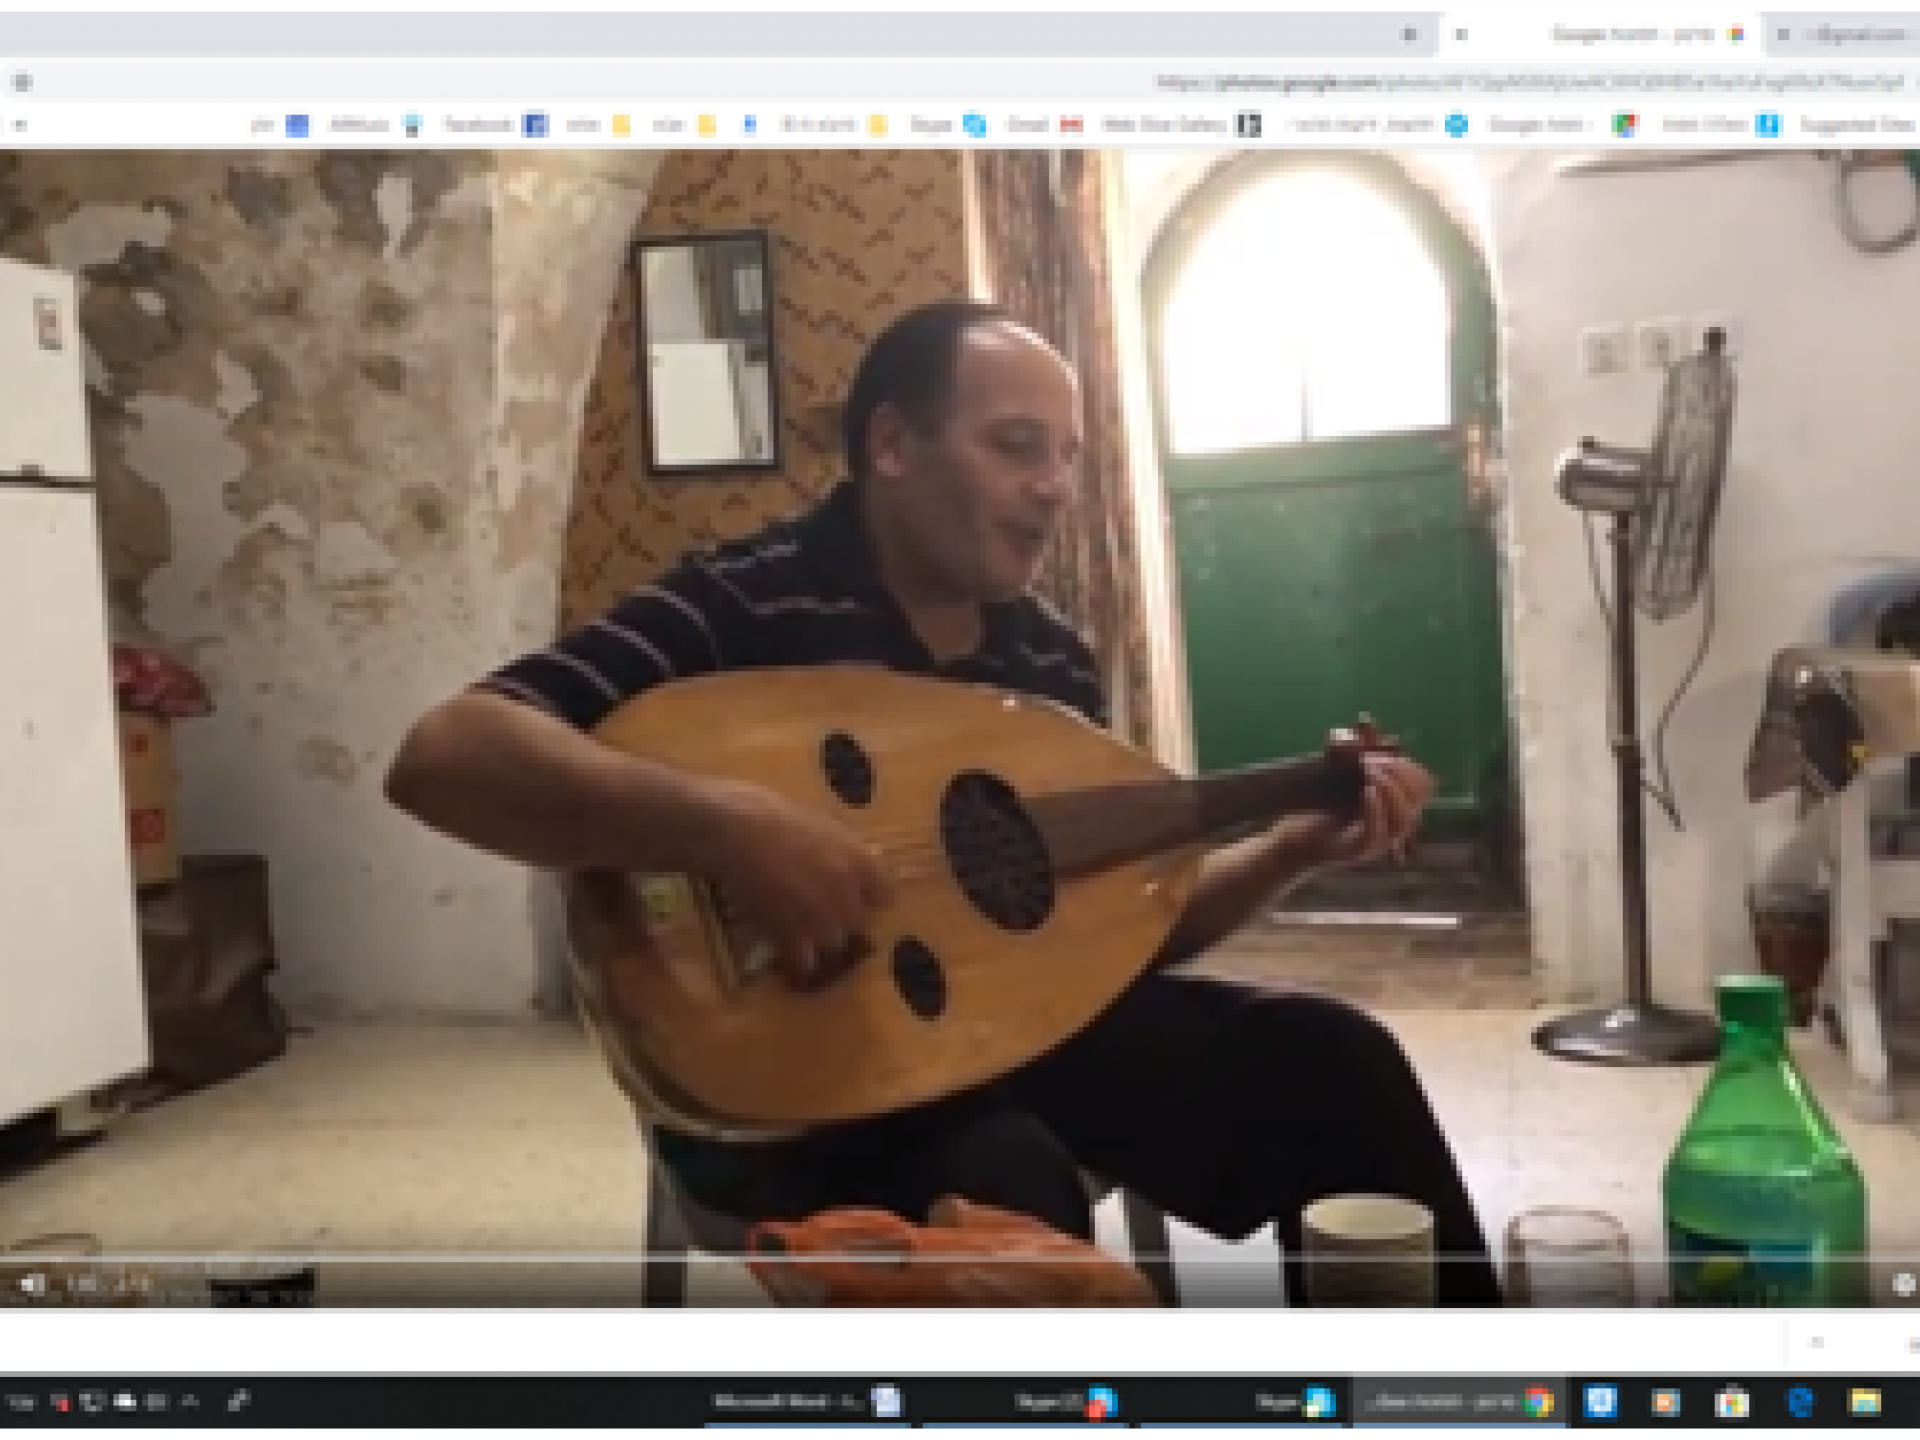 The Oud player